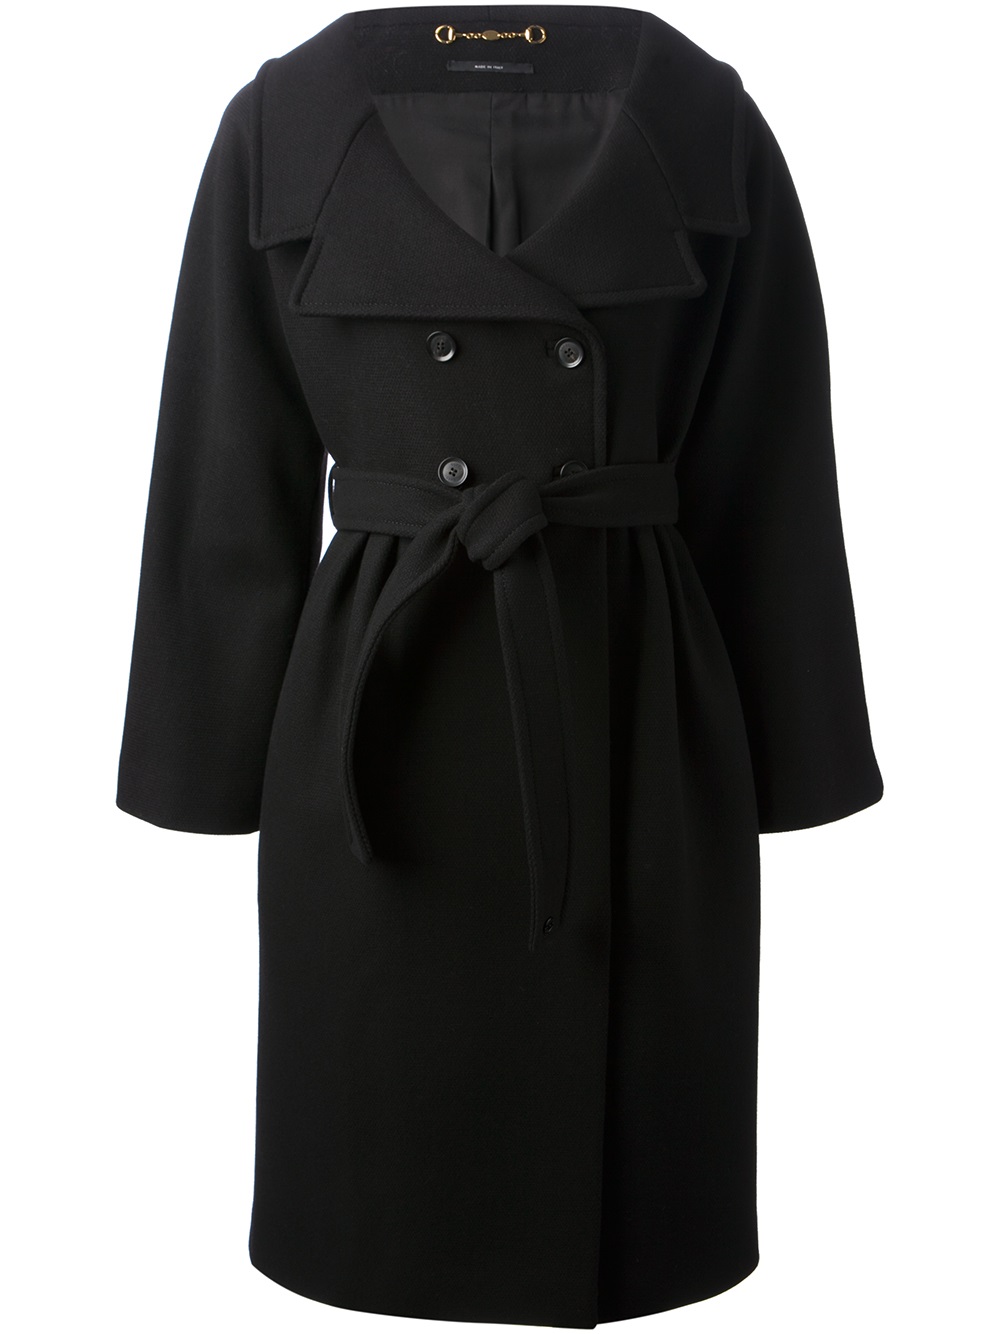 Gucci Belted Coat in Black | Lyst